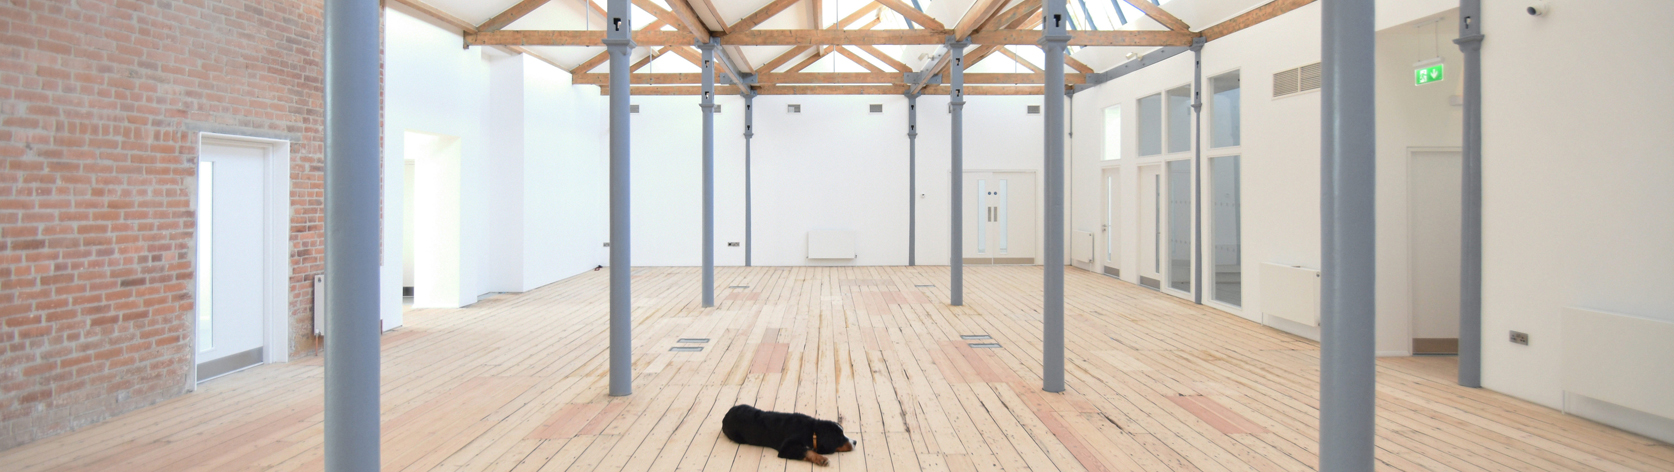 A dog lying in a architecture designed office